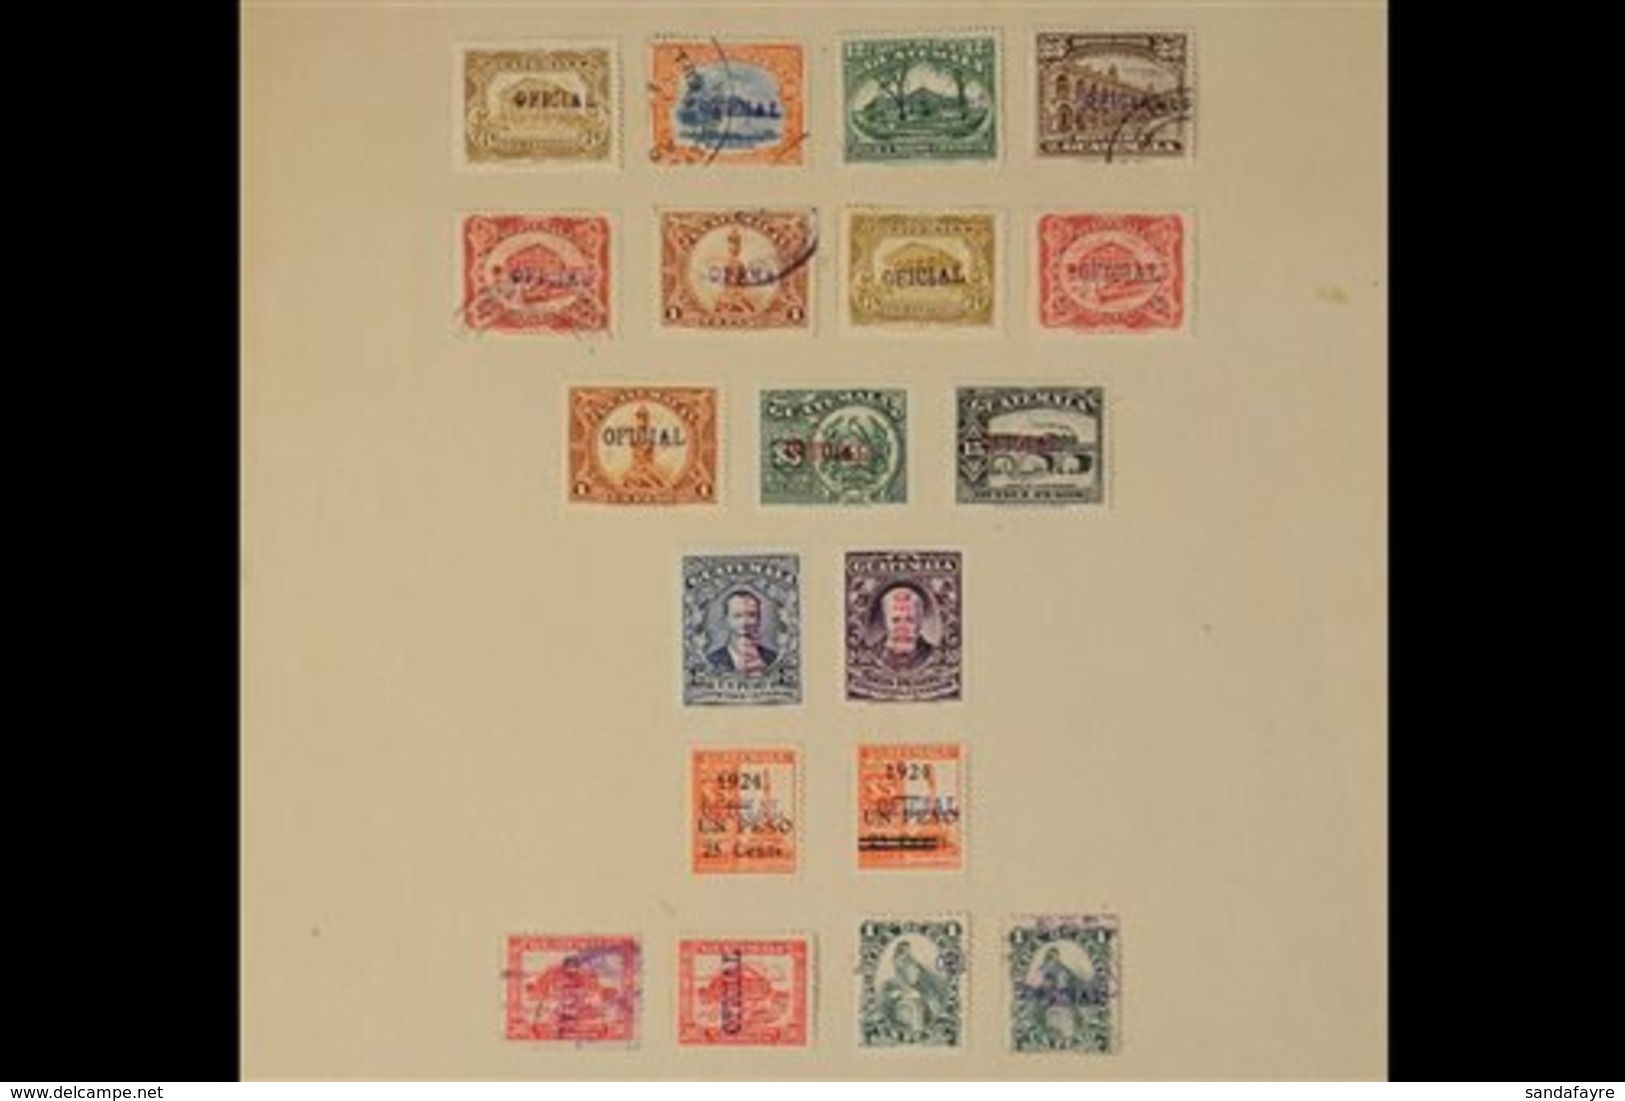 OFFICIALS LOCAL PERFINS & HANDSTAMPS 1912-1926 Mint & Used Collection Of Various Stamps With "OFICIAL" Perfins (x28) Or  - Guatemala